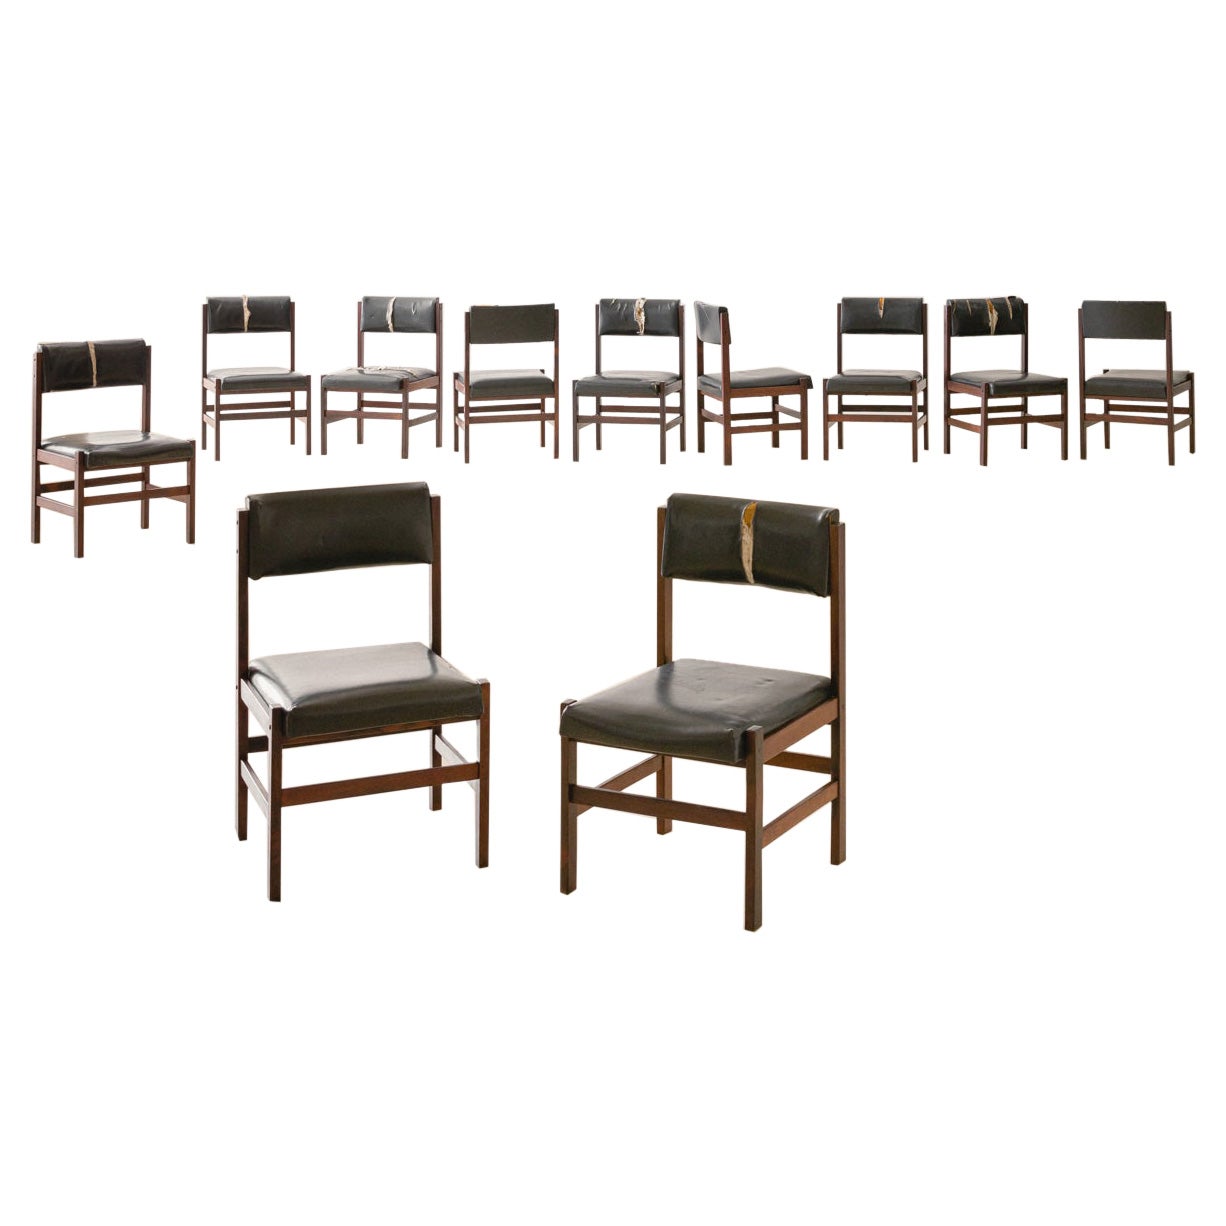 Set of 11 Rosewood Dining Chairs, Brazilian Midcentury Design, 1960s For Sale